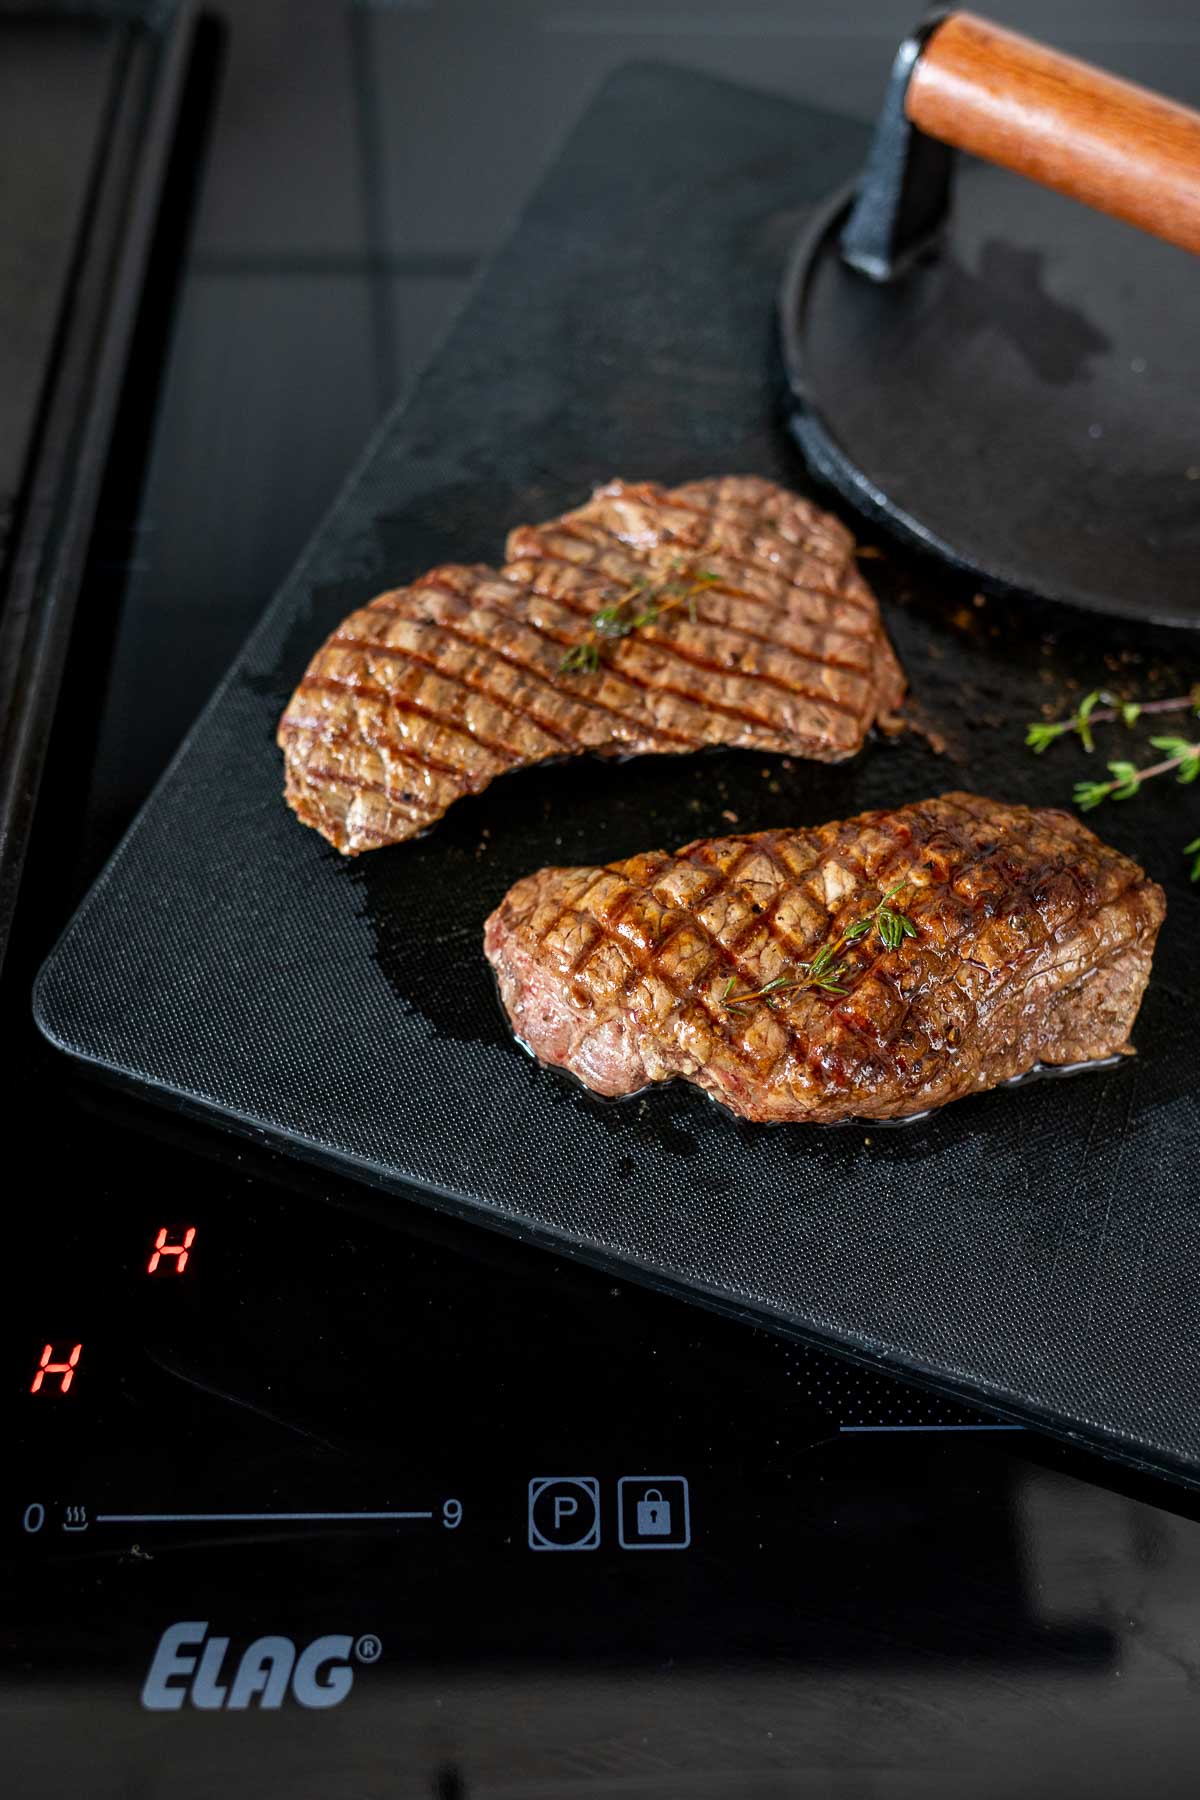 Grilling steak with ELAG induction hob and grill plate